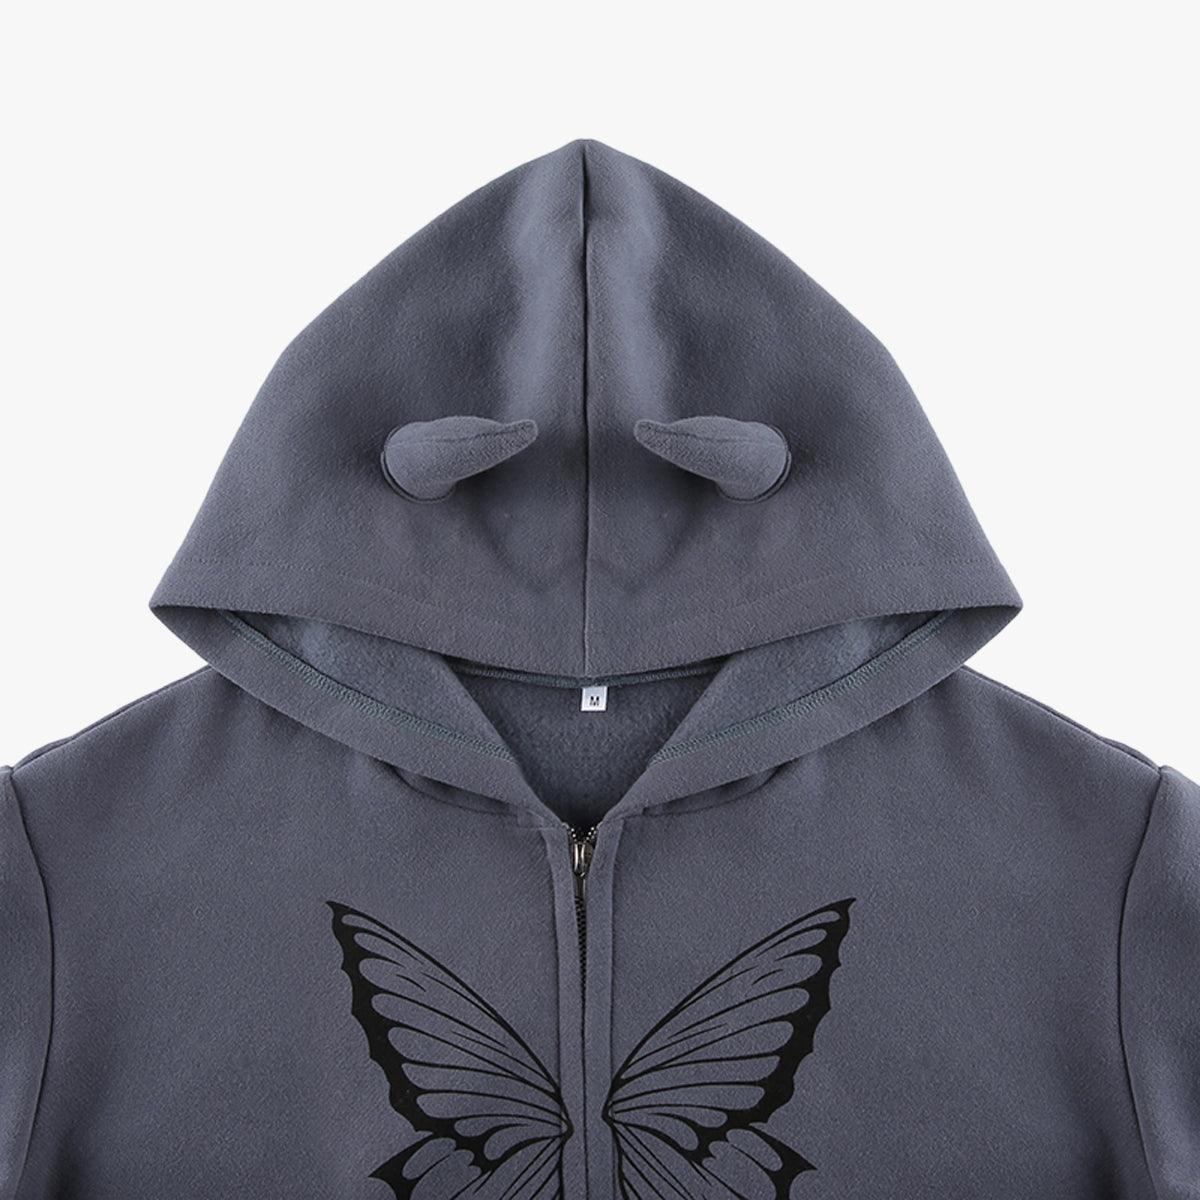 Butterfly Aesthetic Horned Hoodie - Aesthetic Clothes Shop